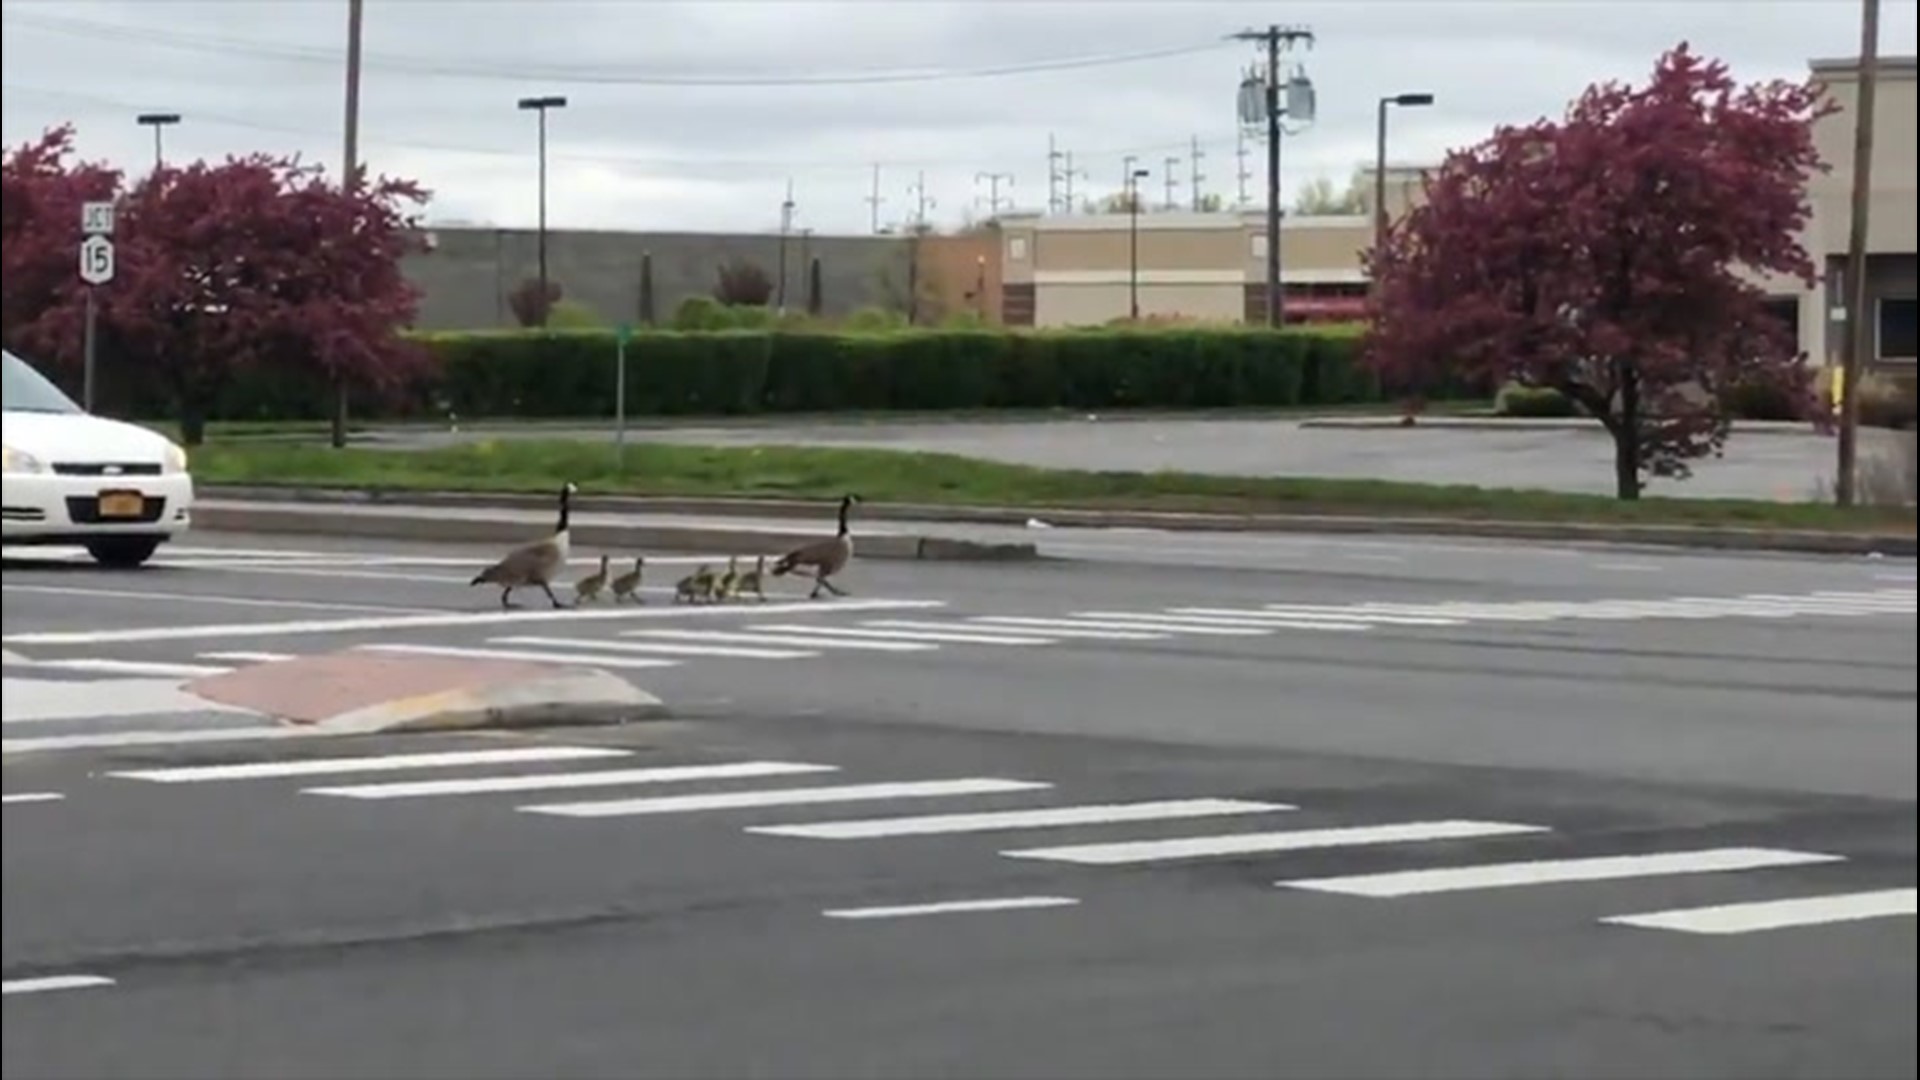 Two geese and their goslings safely crossed a road in Henrietta, New York, under a cloudy sky on Wednesday, May 5.